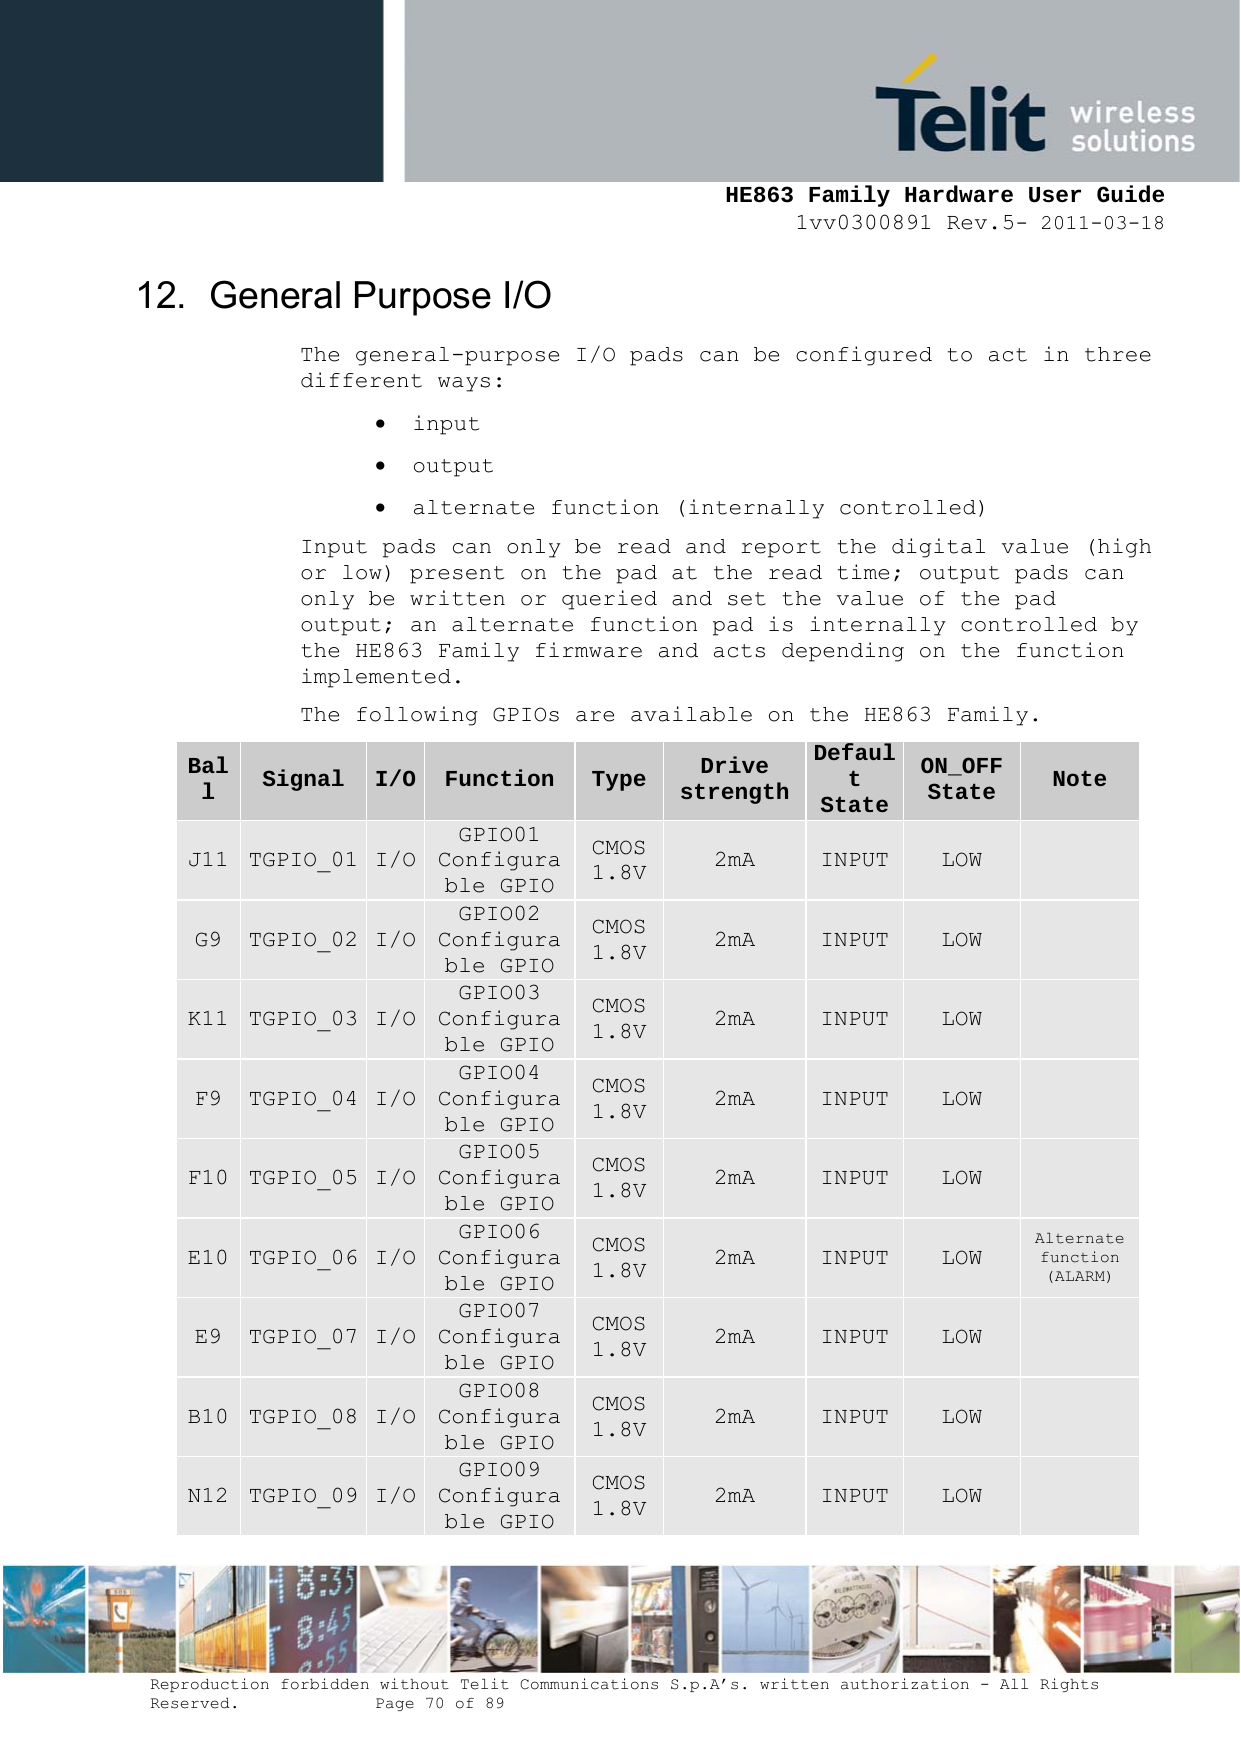     HE863 Family Hardware User Guide 1vv0300891 Rev.5- 2011-03-18    Reproduction forbidden without Telit Communications S.p.A’s. written authorization - All Rights Reserved.    Page 70 of 89  12.  General Purpose I/O The general-purpose I/O pads can be configured to act in three different ways:  input  output  alternate function (internally controlled) Input pads can only be read and report the digital value (high or low) present on the pad at the read time; output pads can only be written or queried and set the value of the pad output; an alternate function pad is internally controlled by the HE863 Family firmware and acts depending on the function implemented. The following GPIOs are available on the HE863 Family.  Ball  Signal  I/O  Function  Type Drive strengthDefault State ON_OFF State  Note J11  TGPIO_01 I/O GPIO01 Configurable GPIO CMOS 1.8V 2mA  INPUT  LOW   G9  TGPIO_02 I/O GPIO02 Configurable GPIO CMOS 1.8V 2mA  INPUT  LOW   K11  TGPIO_03 I/O GPIO03 Configurable GPIO CMOS 1.8V 2mA  INPUT  LOW   F9  TGPIO_04 I/O GPIO04 Configurable GPIO CMOS 1.8V 2mA  INPUT  LOW   F10  TGPIO_05 I/O GPIO05 Configurable GPIO CMOS 1.8V 2mA  INPUT  LOW   E10  TGPIO_06 I/O GPIO06 Configurable GPIO CMOS 1.8V 2mA  INPUT  LOW Alternate function (ALARM) E9  TGPIO_07 I/O GPIO07 Configurable GPIO CMOS 1.8V 2mA  INPUT  LOW   B10  TGPIO_08 I/O GPIO08 Configurable GPIO CMOS 1.8V 2mA  INPUT  LOW   N12  TGPIO_09 I/O GPIO09 Configurable GPIO CMOS 1.8V 2mA  INPUT  LOW   